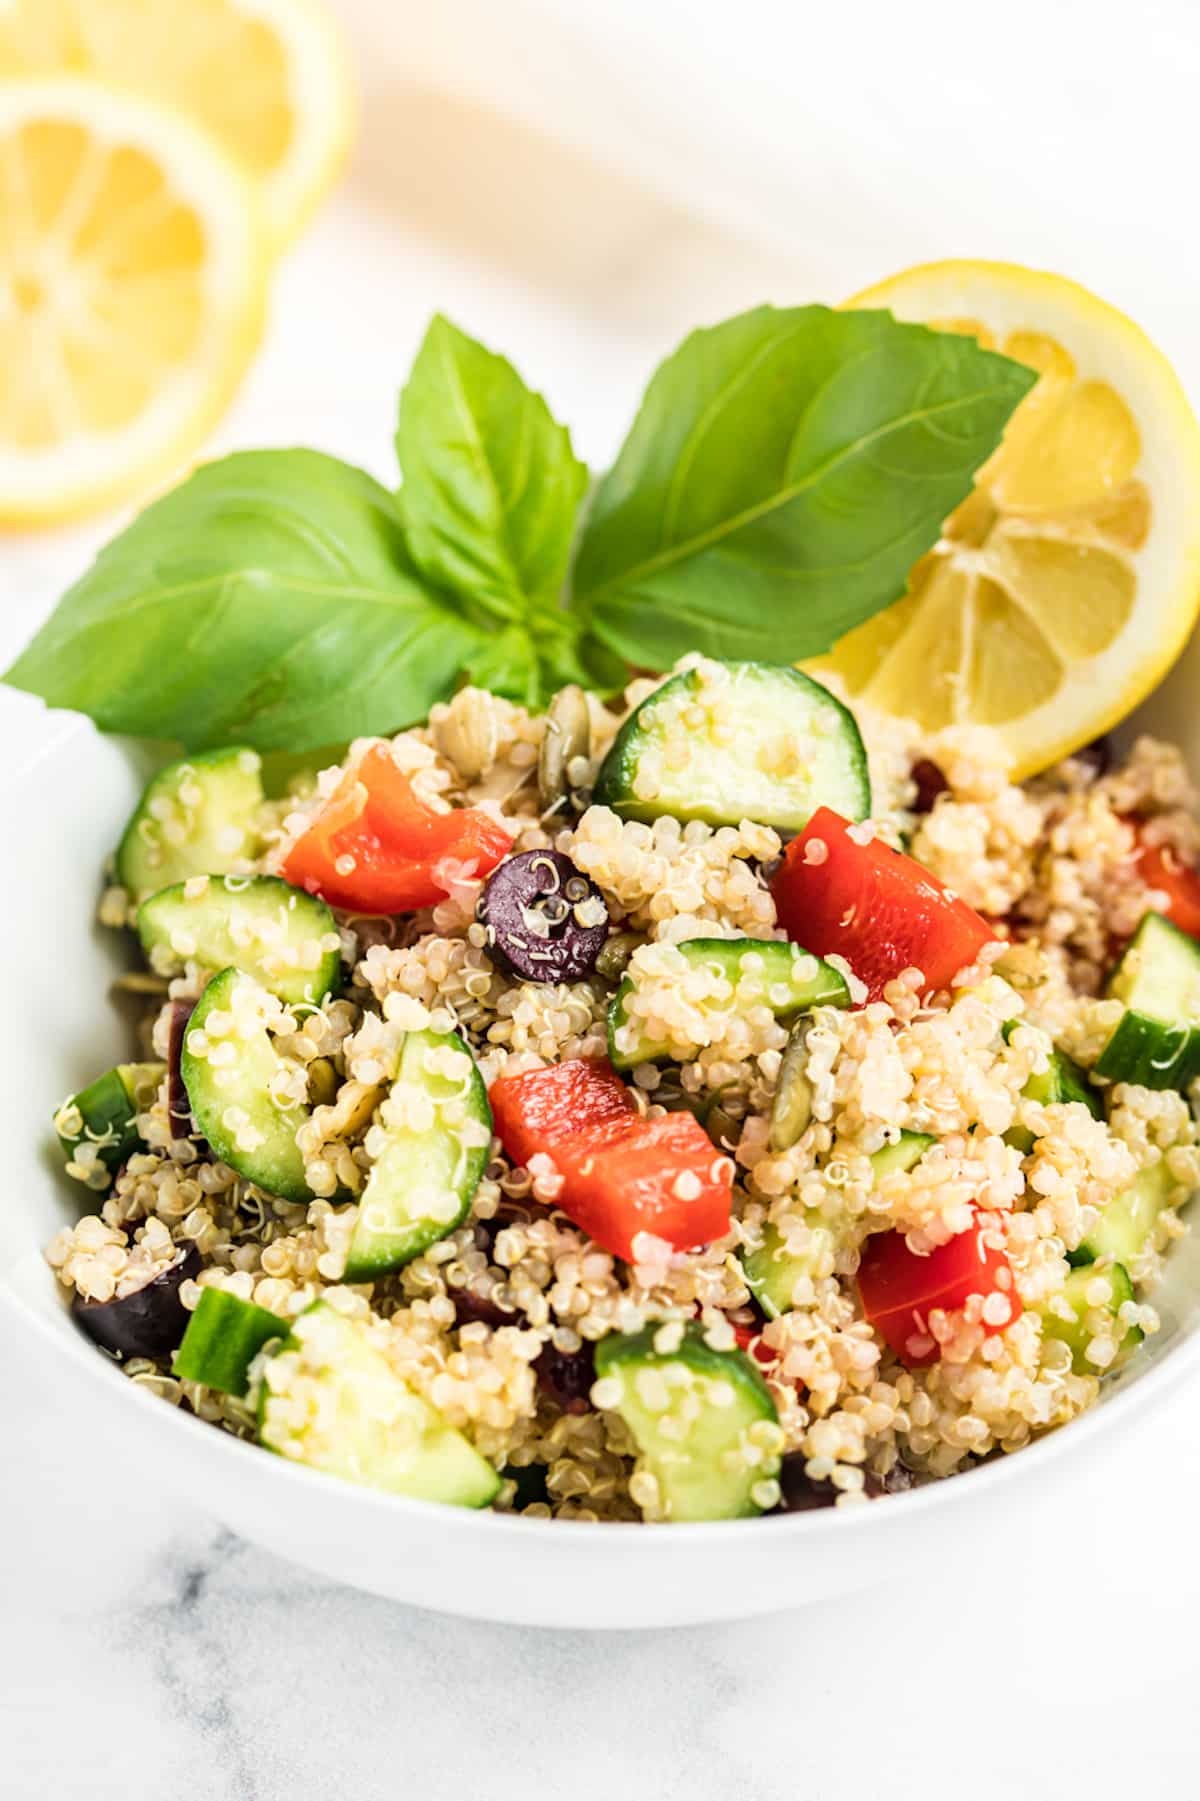 A bowl of quinoa salad with cucumbers, red pepper, and olives